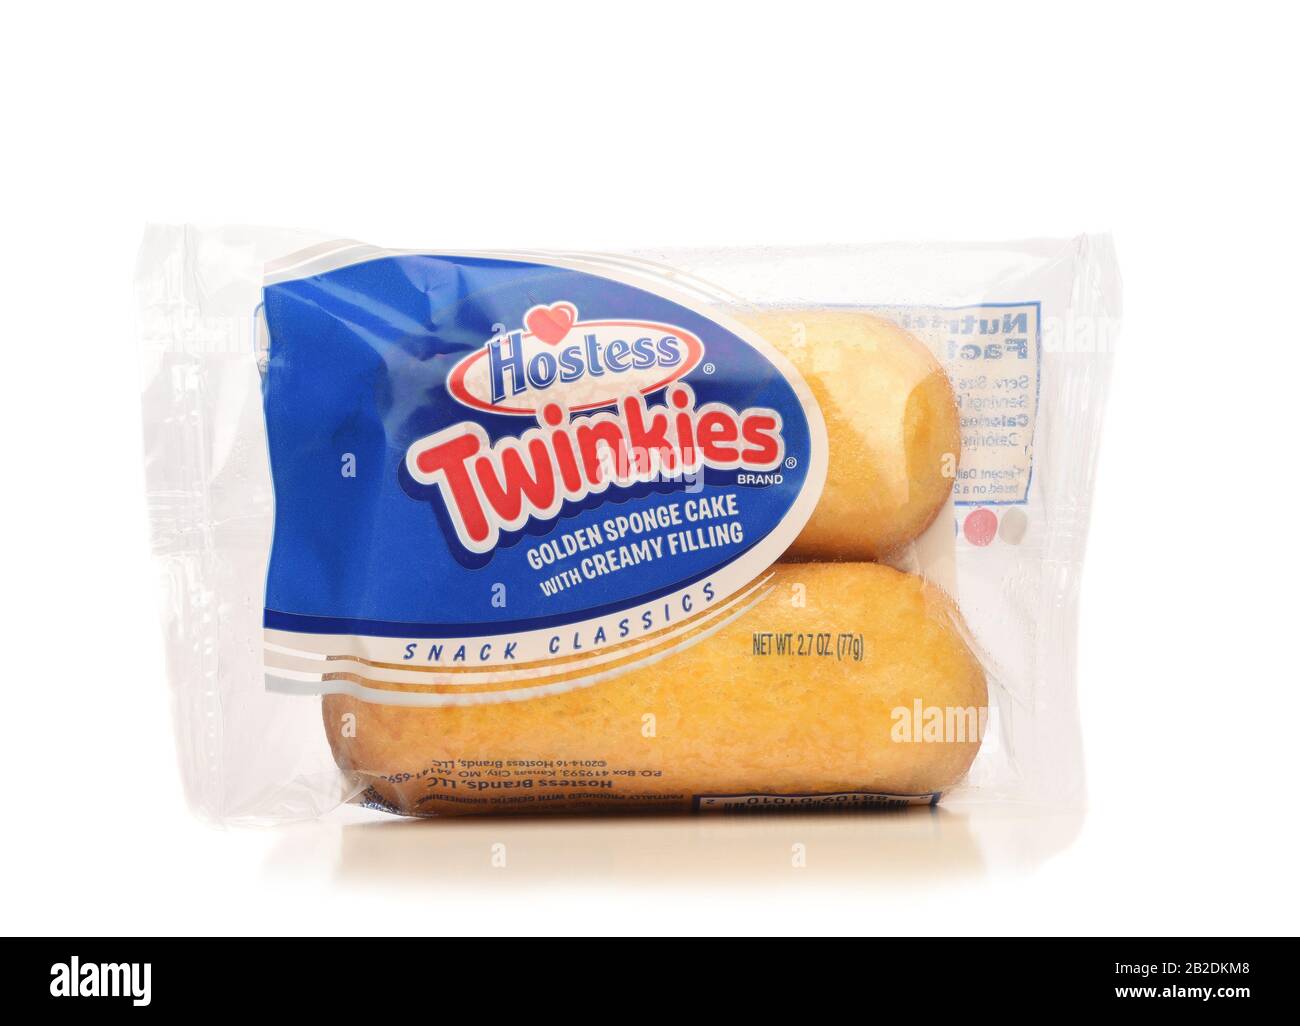 IRVINE, CA - APRIL 4, 2019: A package of two Hostess Twinkies, an American snack cake. The brand is currently owned by Hostess Brands, Inc. Stock Photo